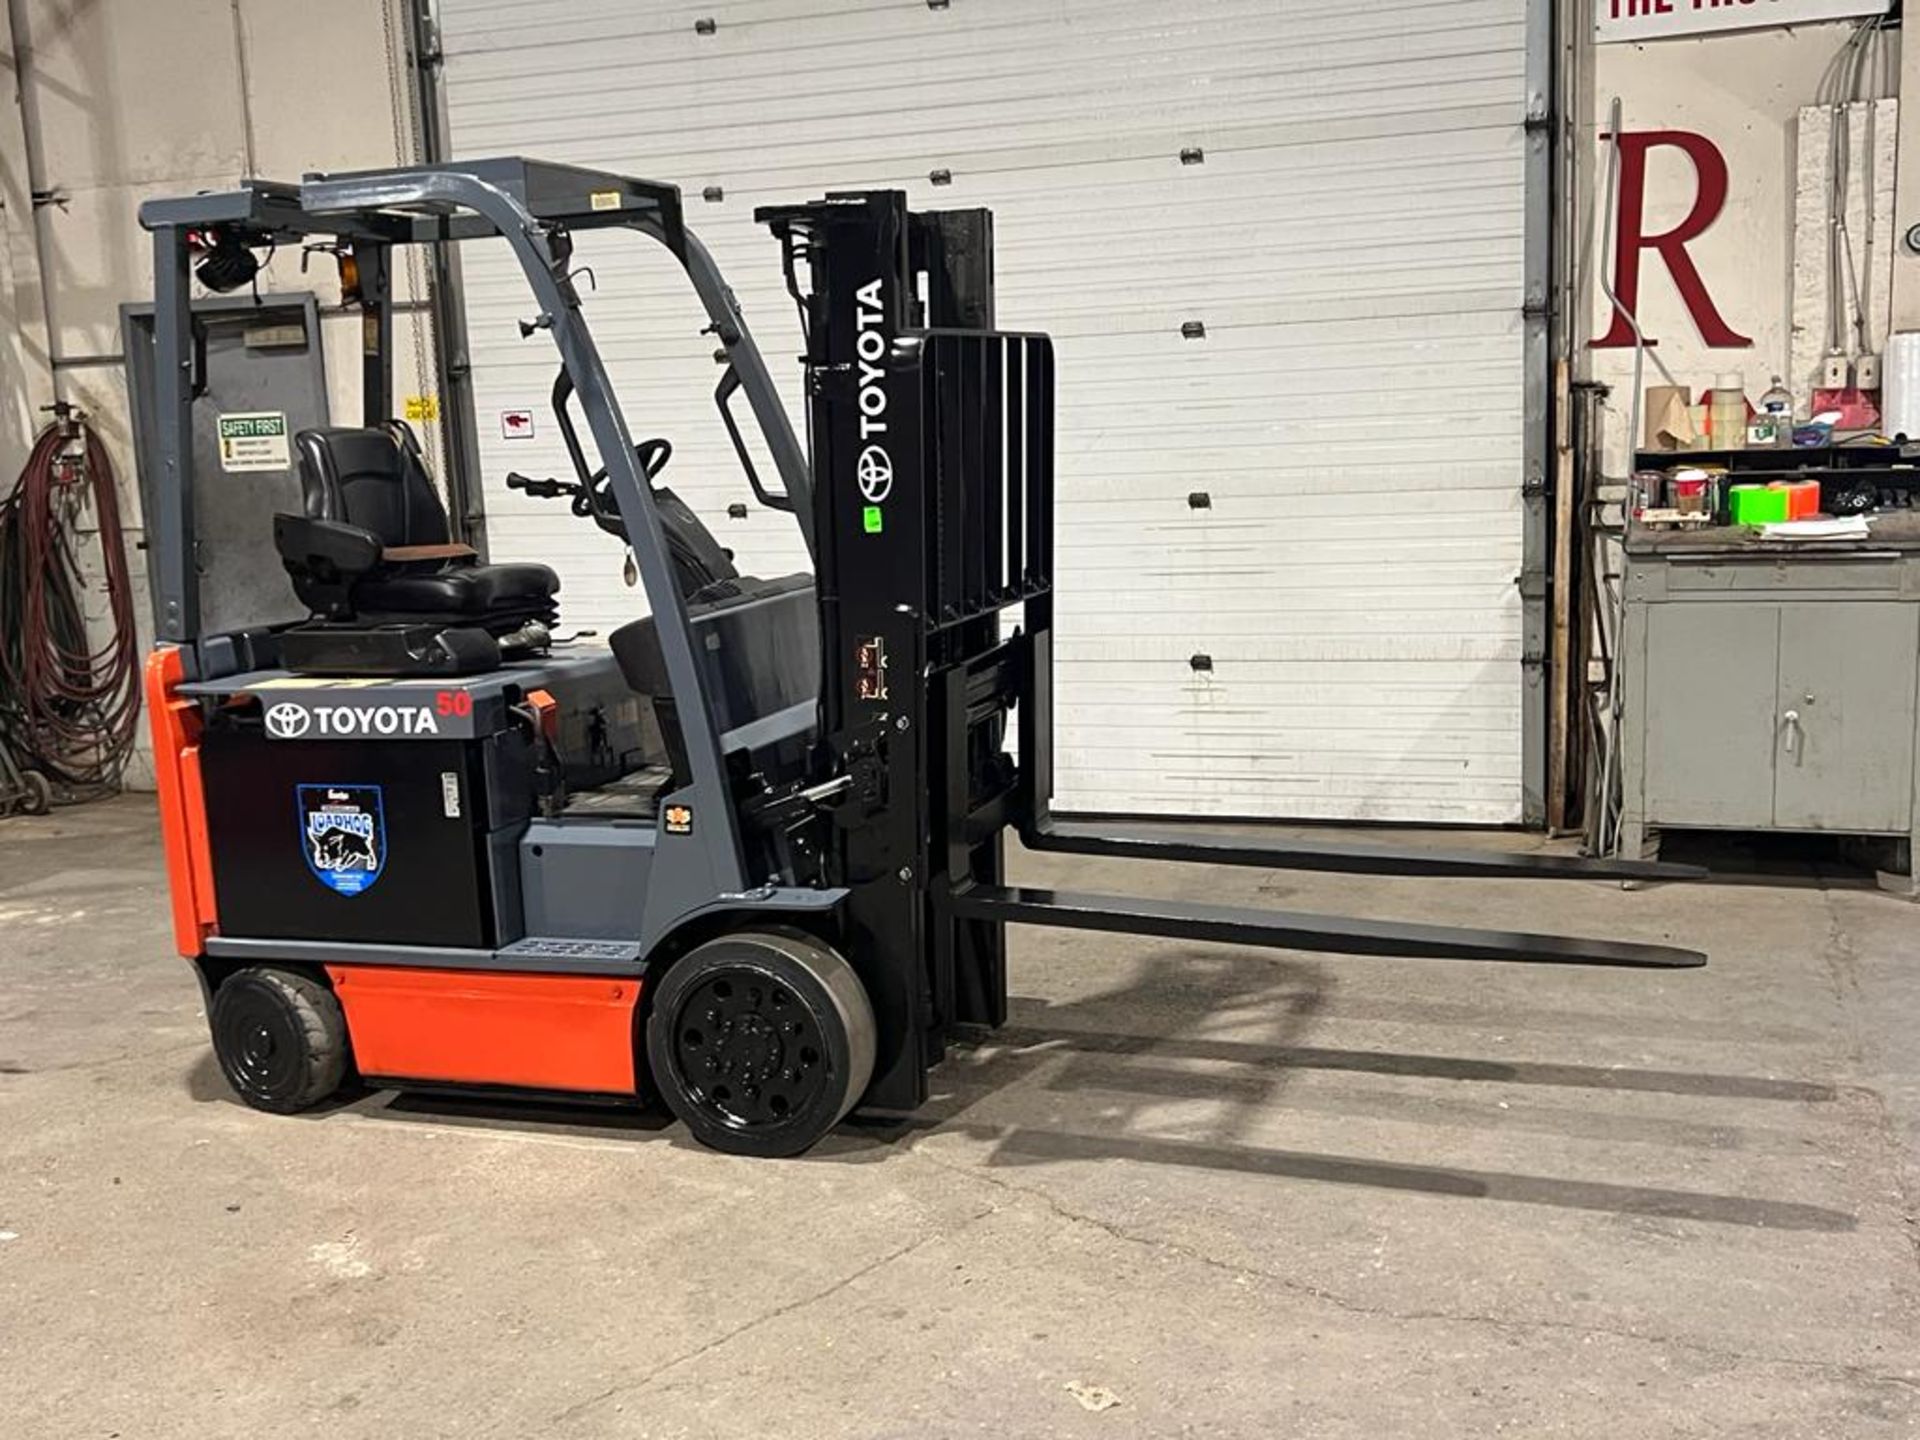 2014 Toyota 5,000lbs Capacity Forklift LPG (propane) battery with Sideshift and 3-stage Mast (no